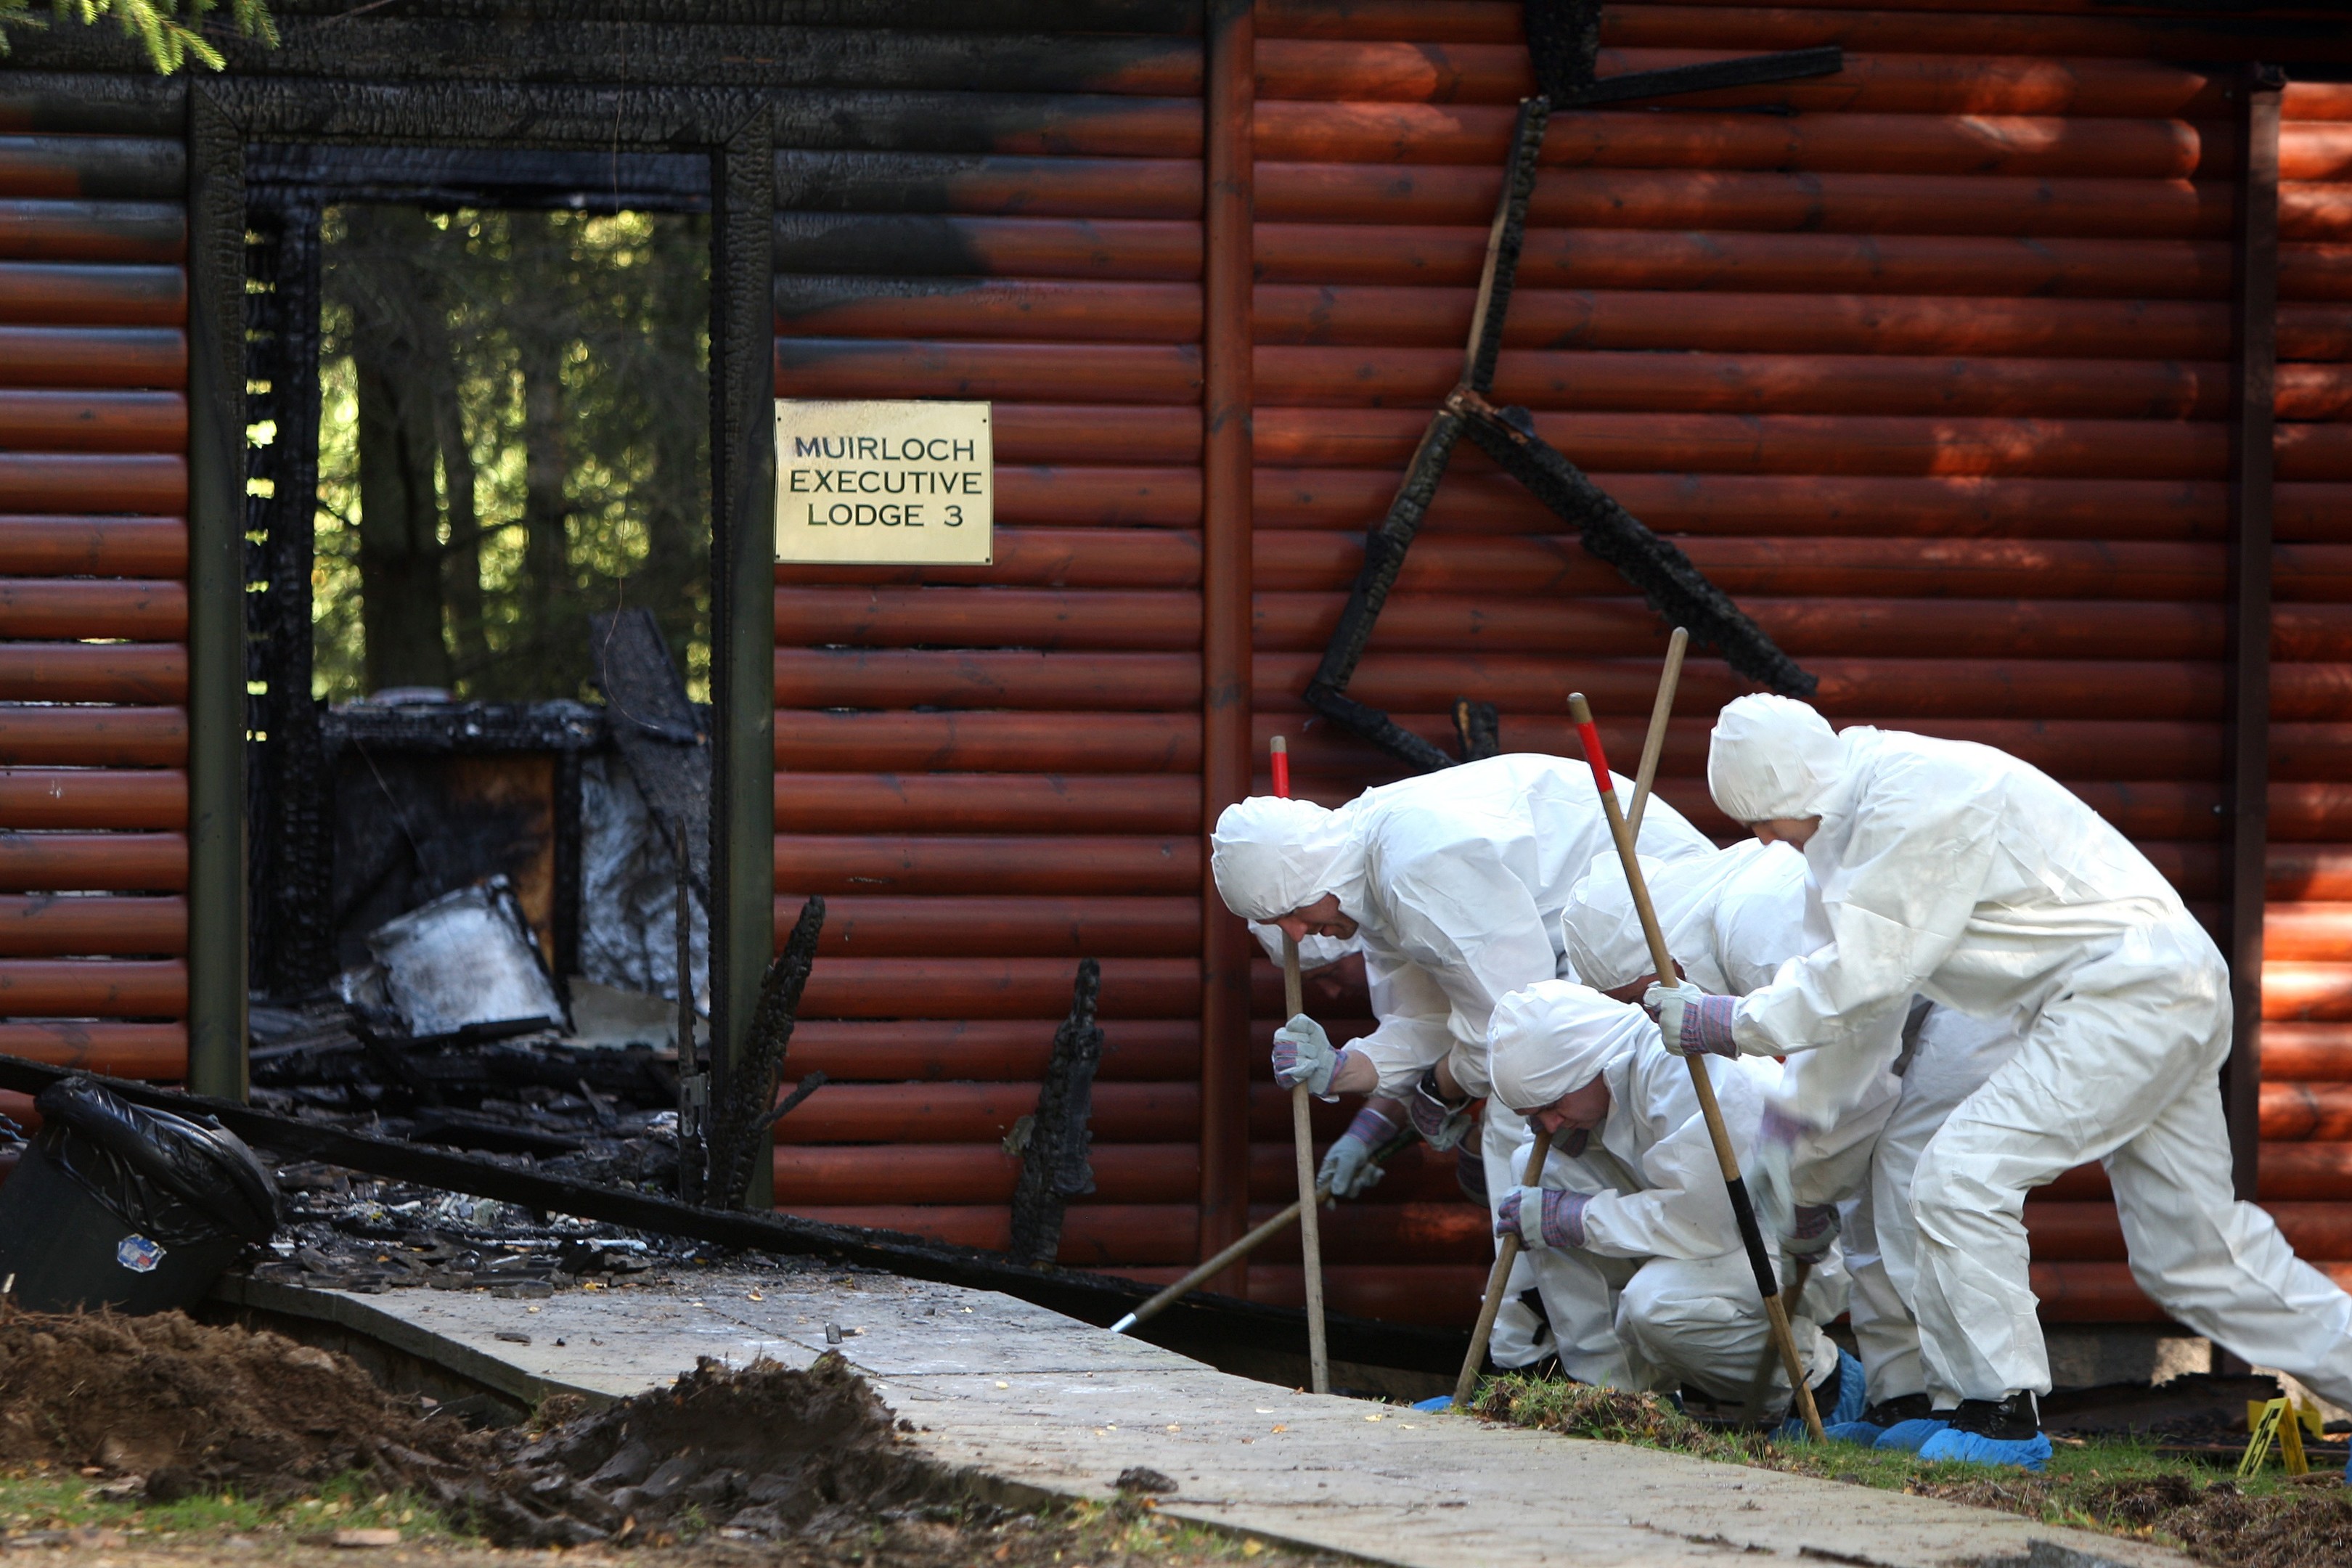 Police carry out a forensic examination of the lodge in 2015.